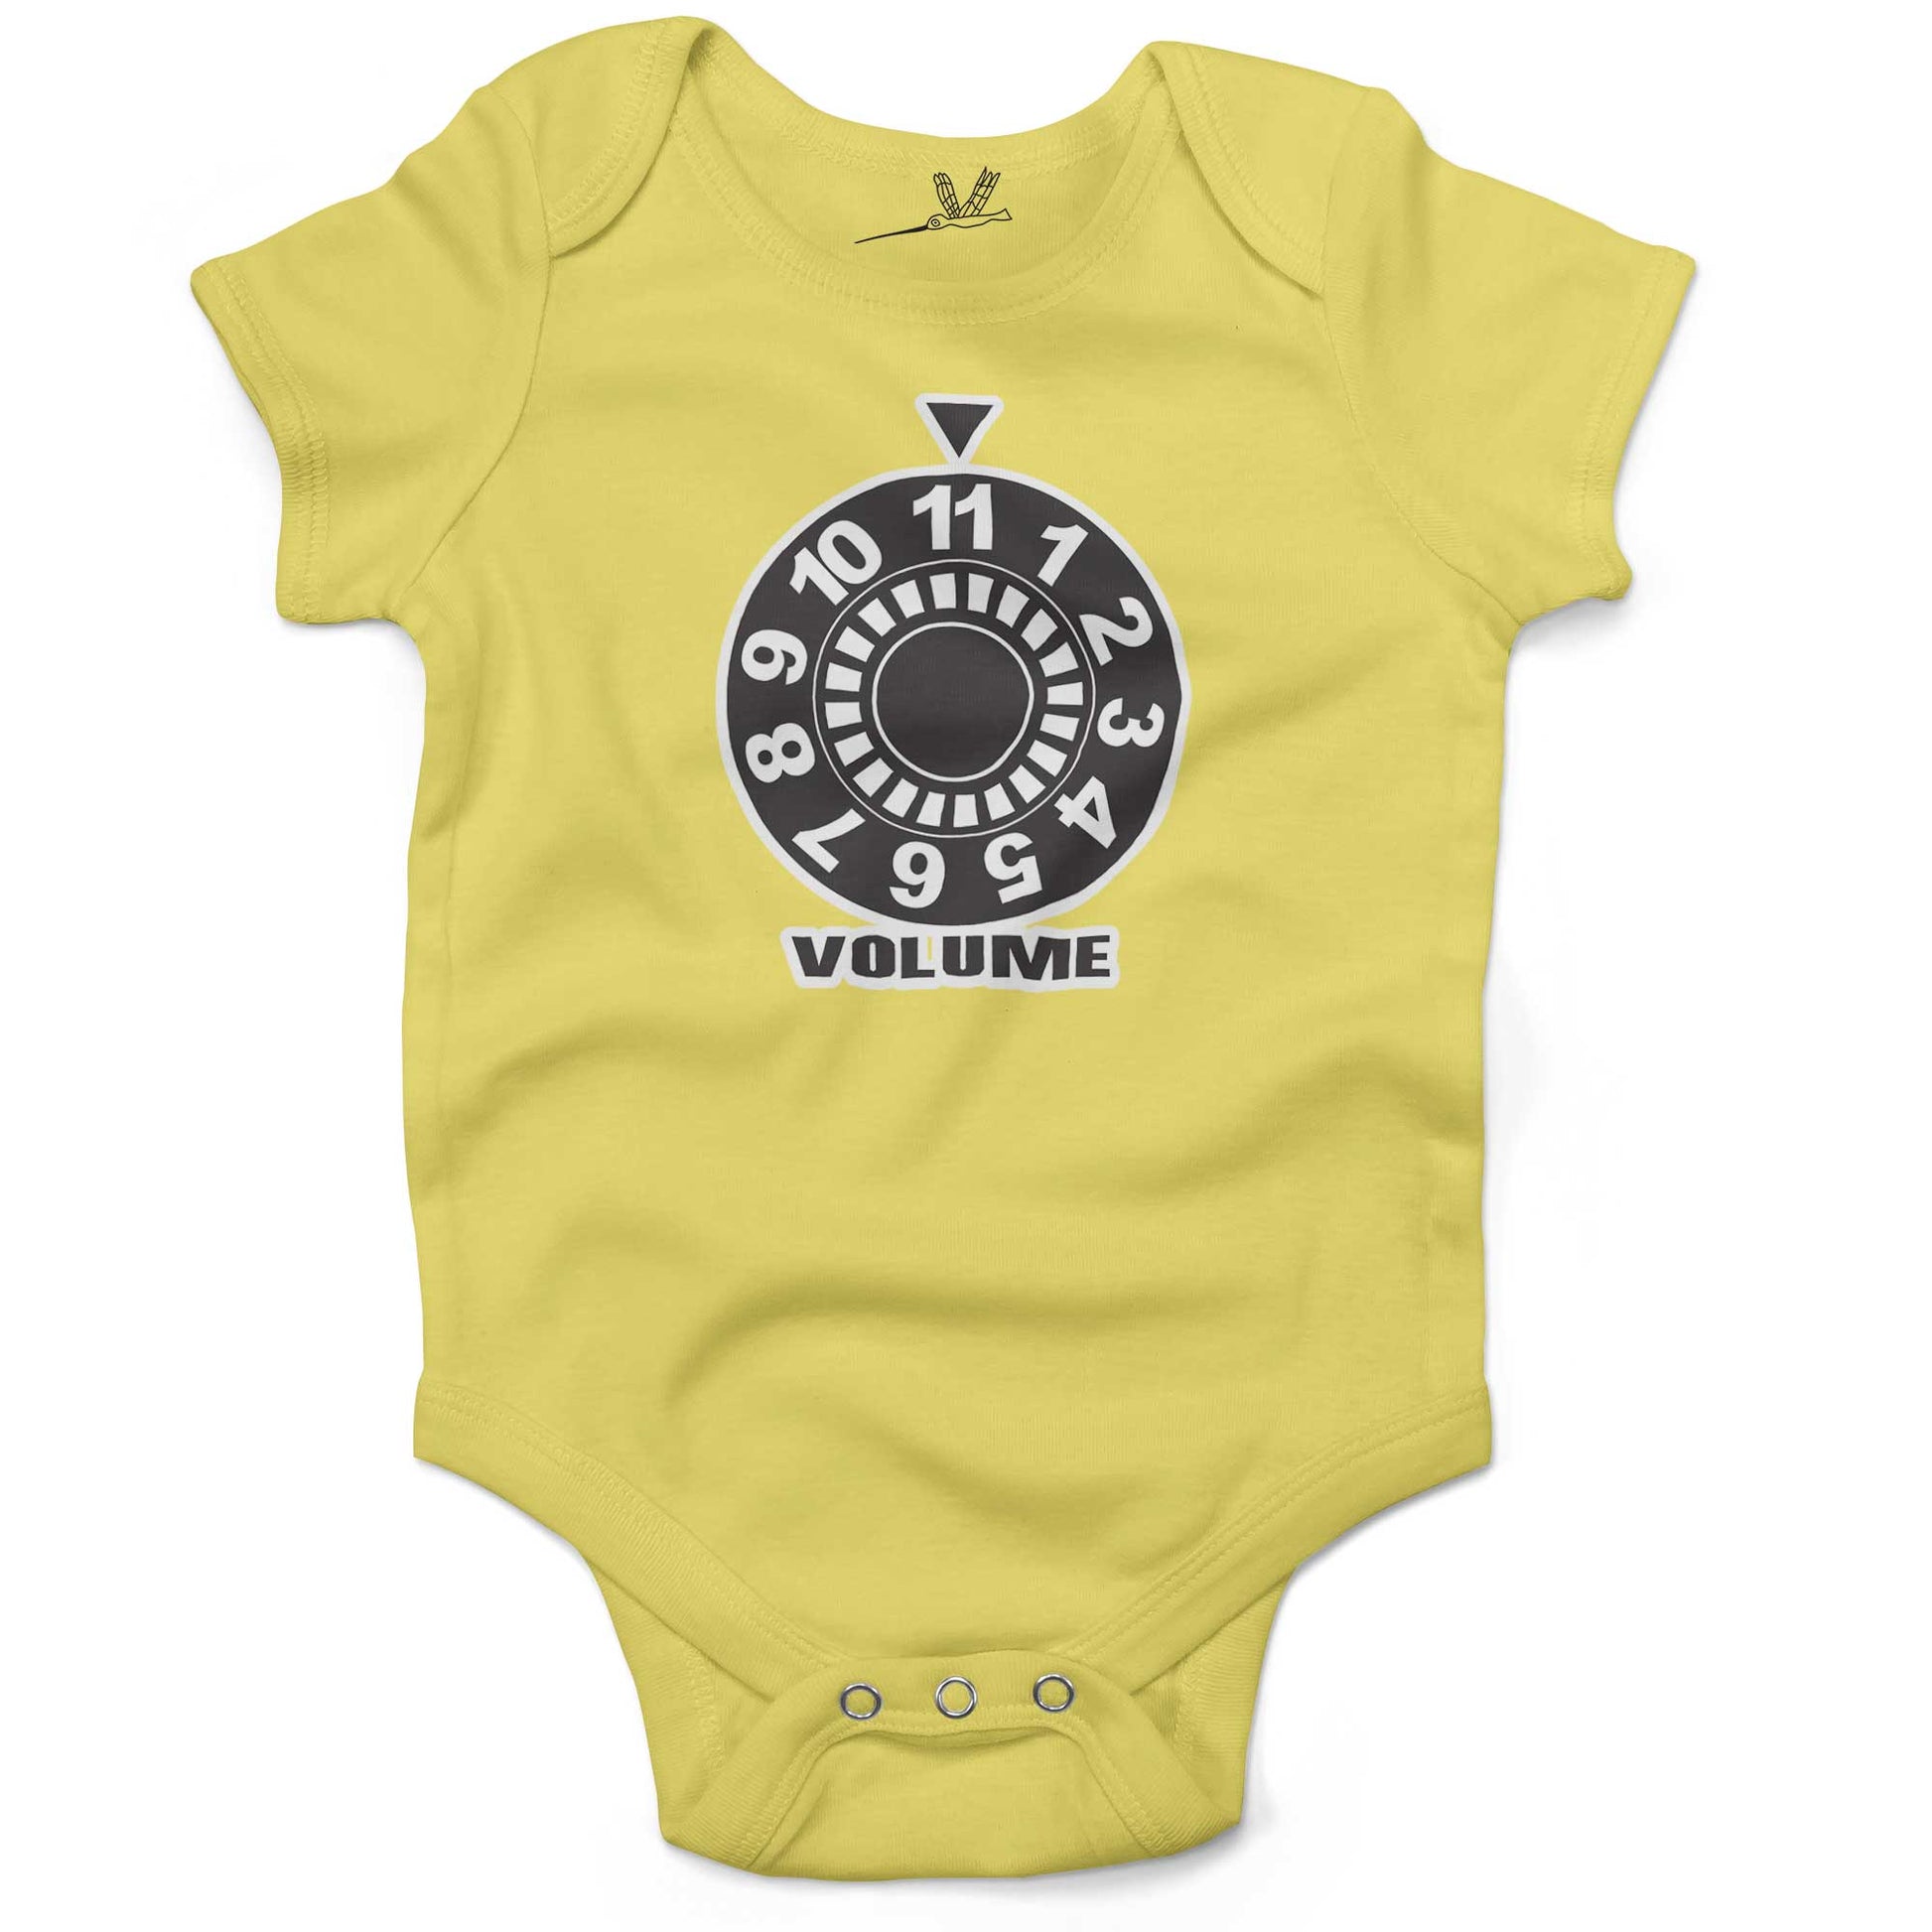 Turn It Up To 11 Infant Bodysuit or Raglan Baby Tee-Yellow-3-6 months